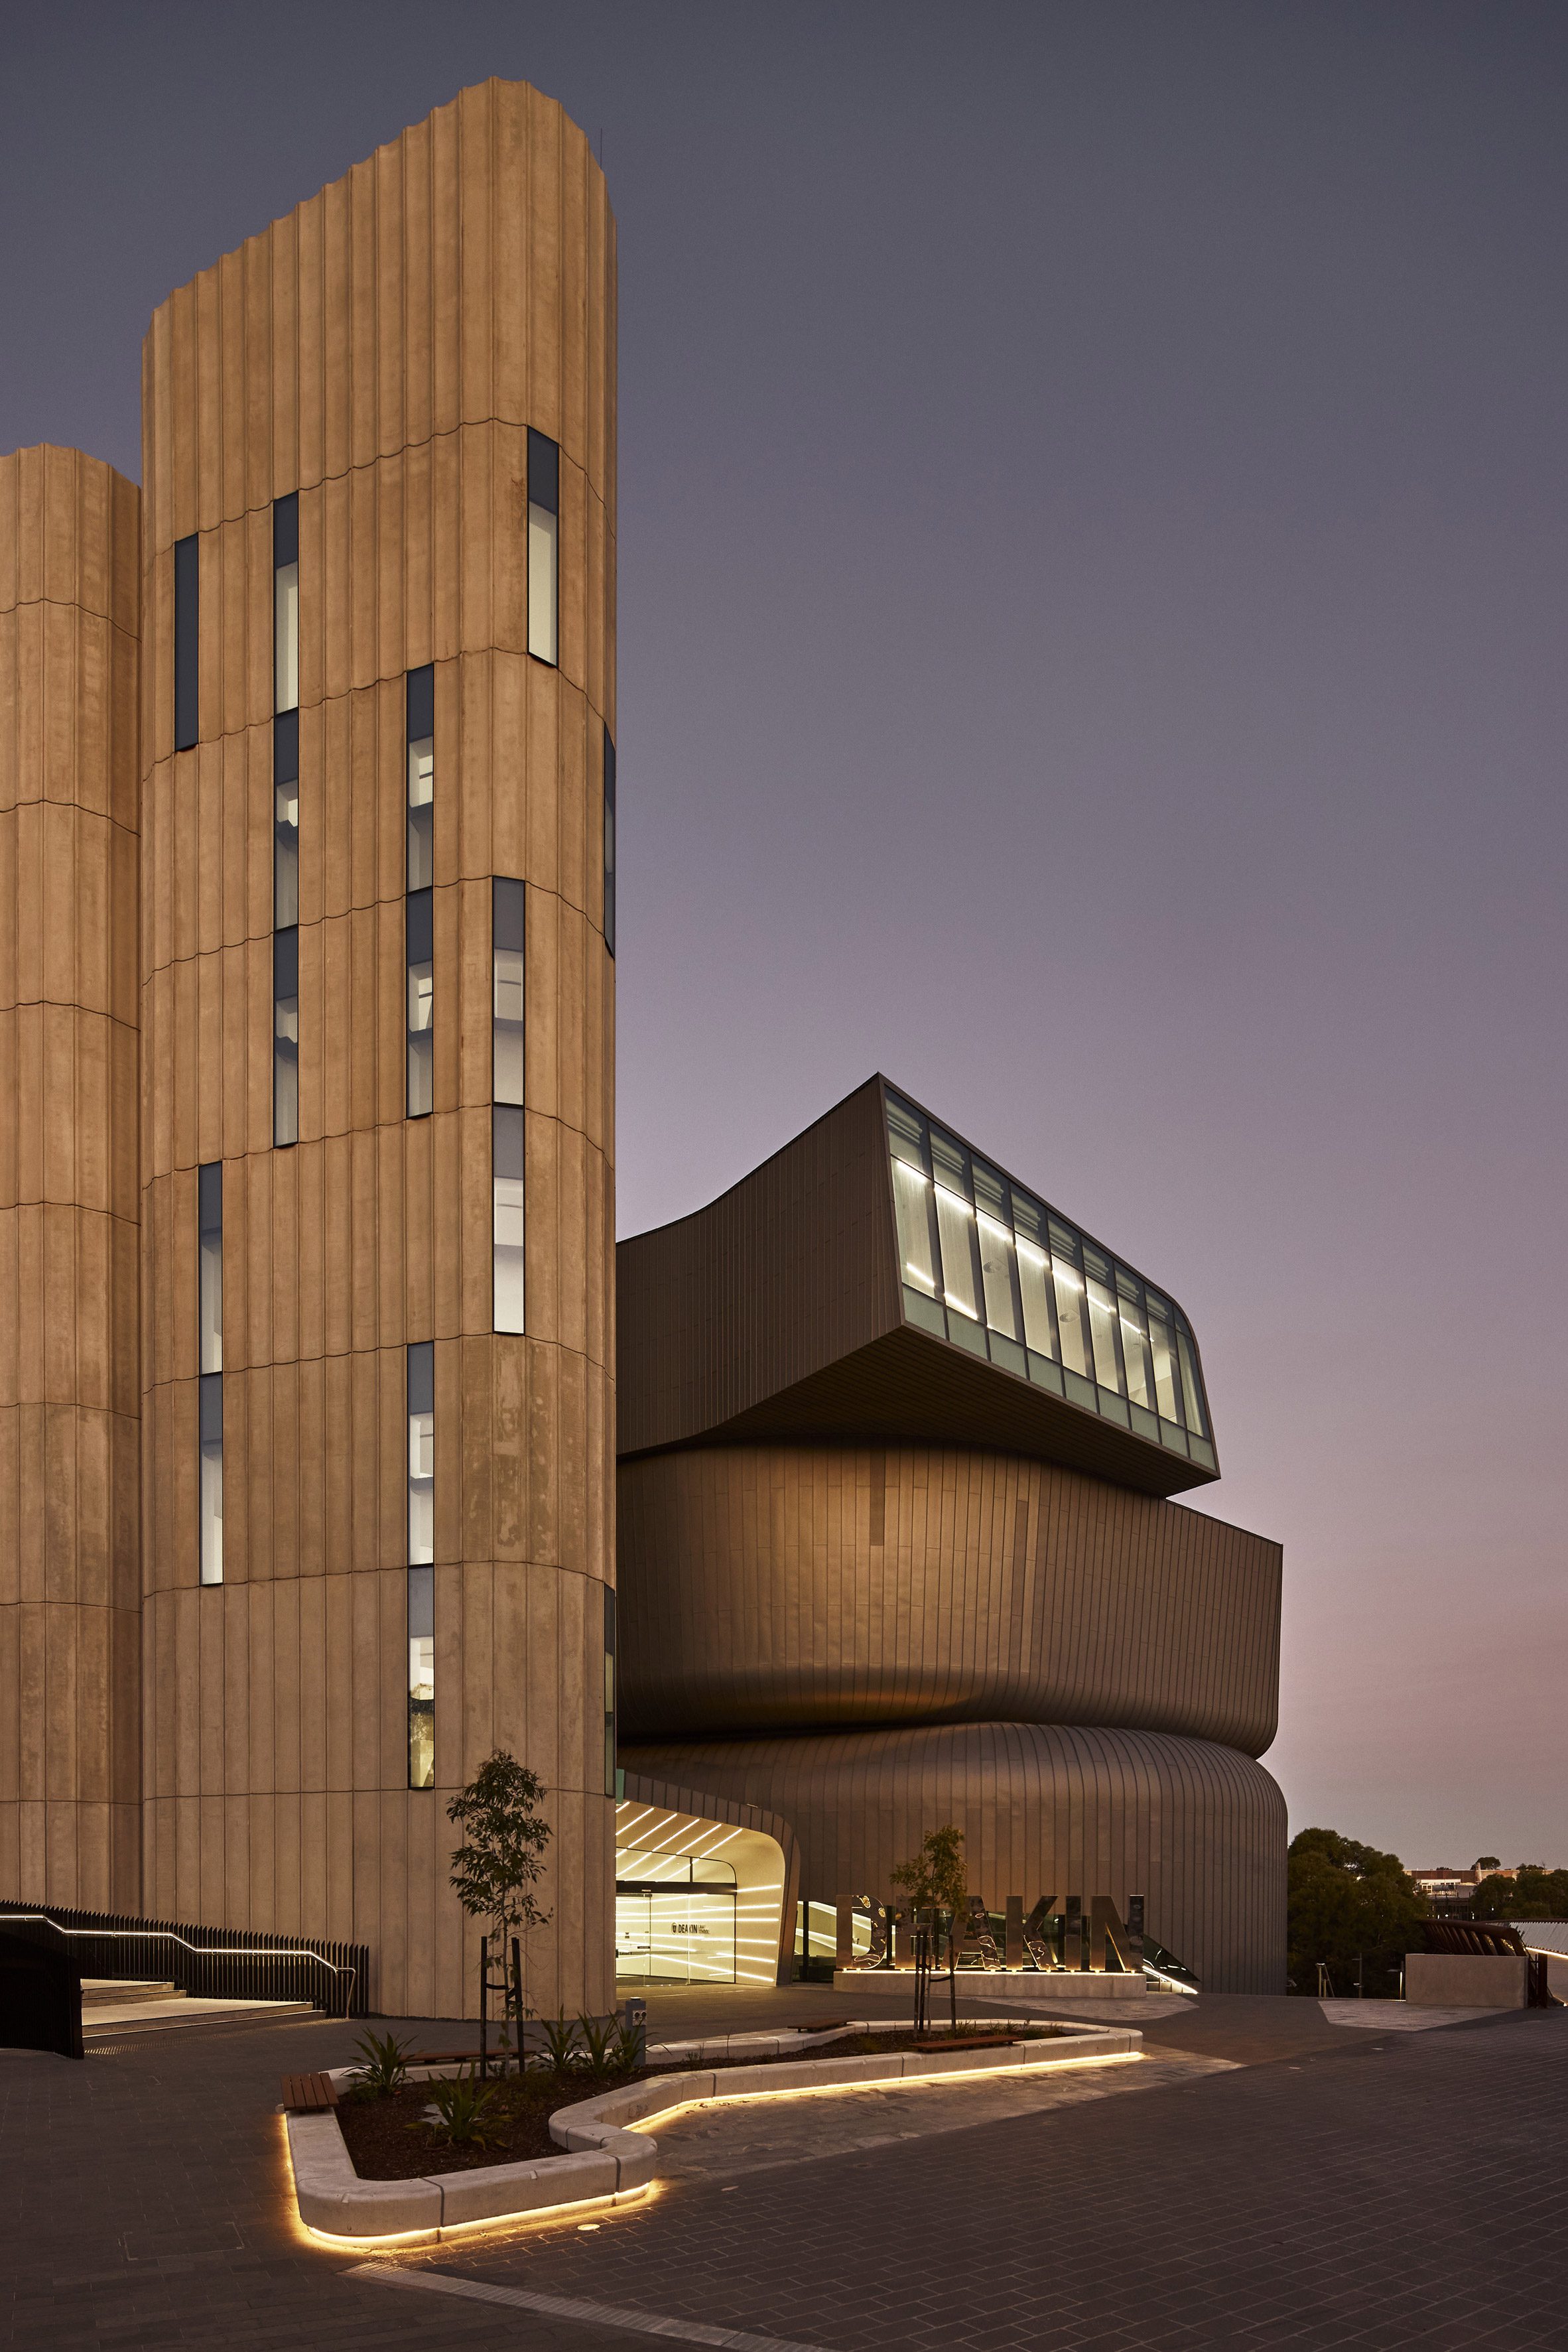 The Deakin Law School pictured at dusk with light reflecting off the exterior